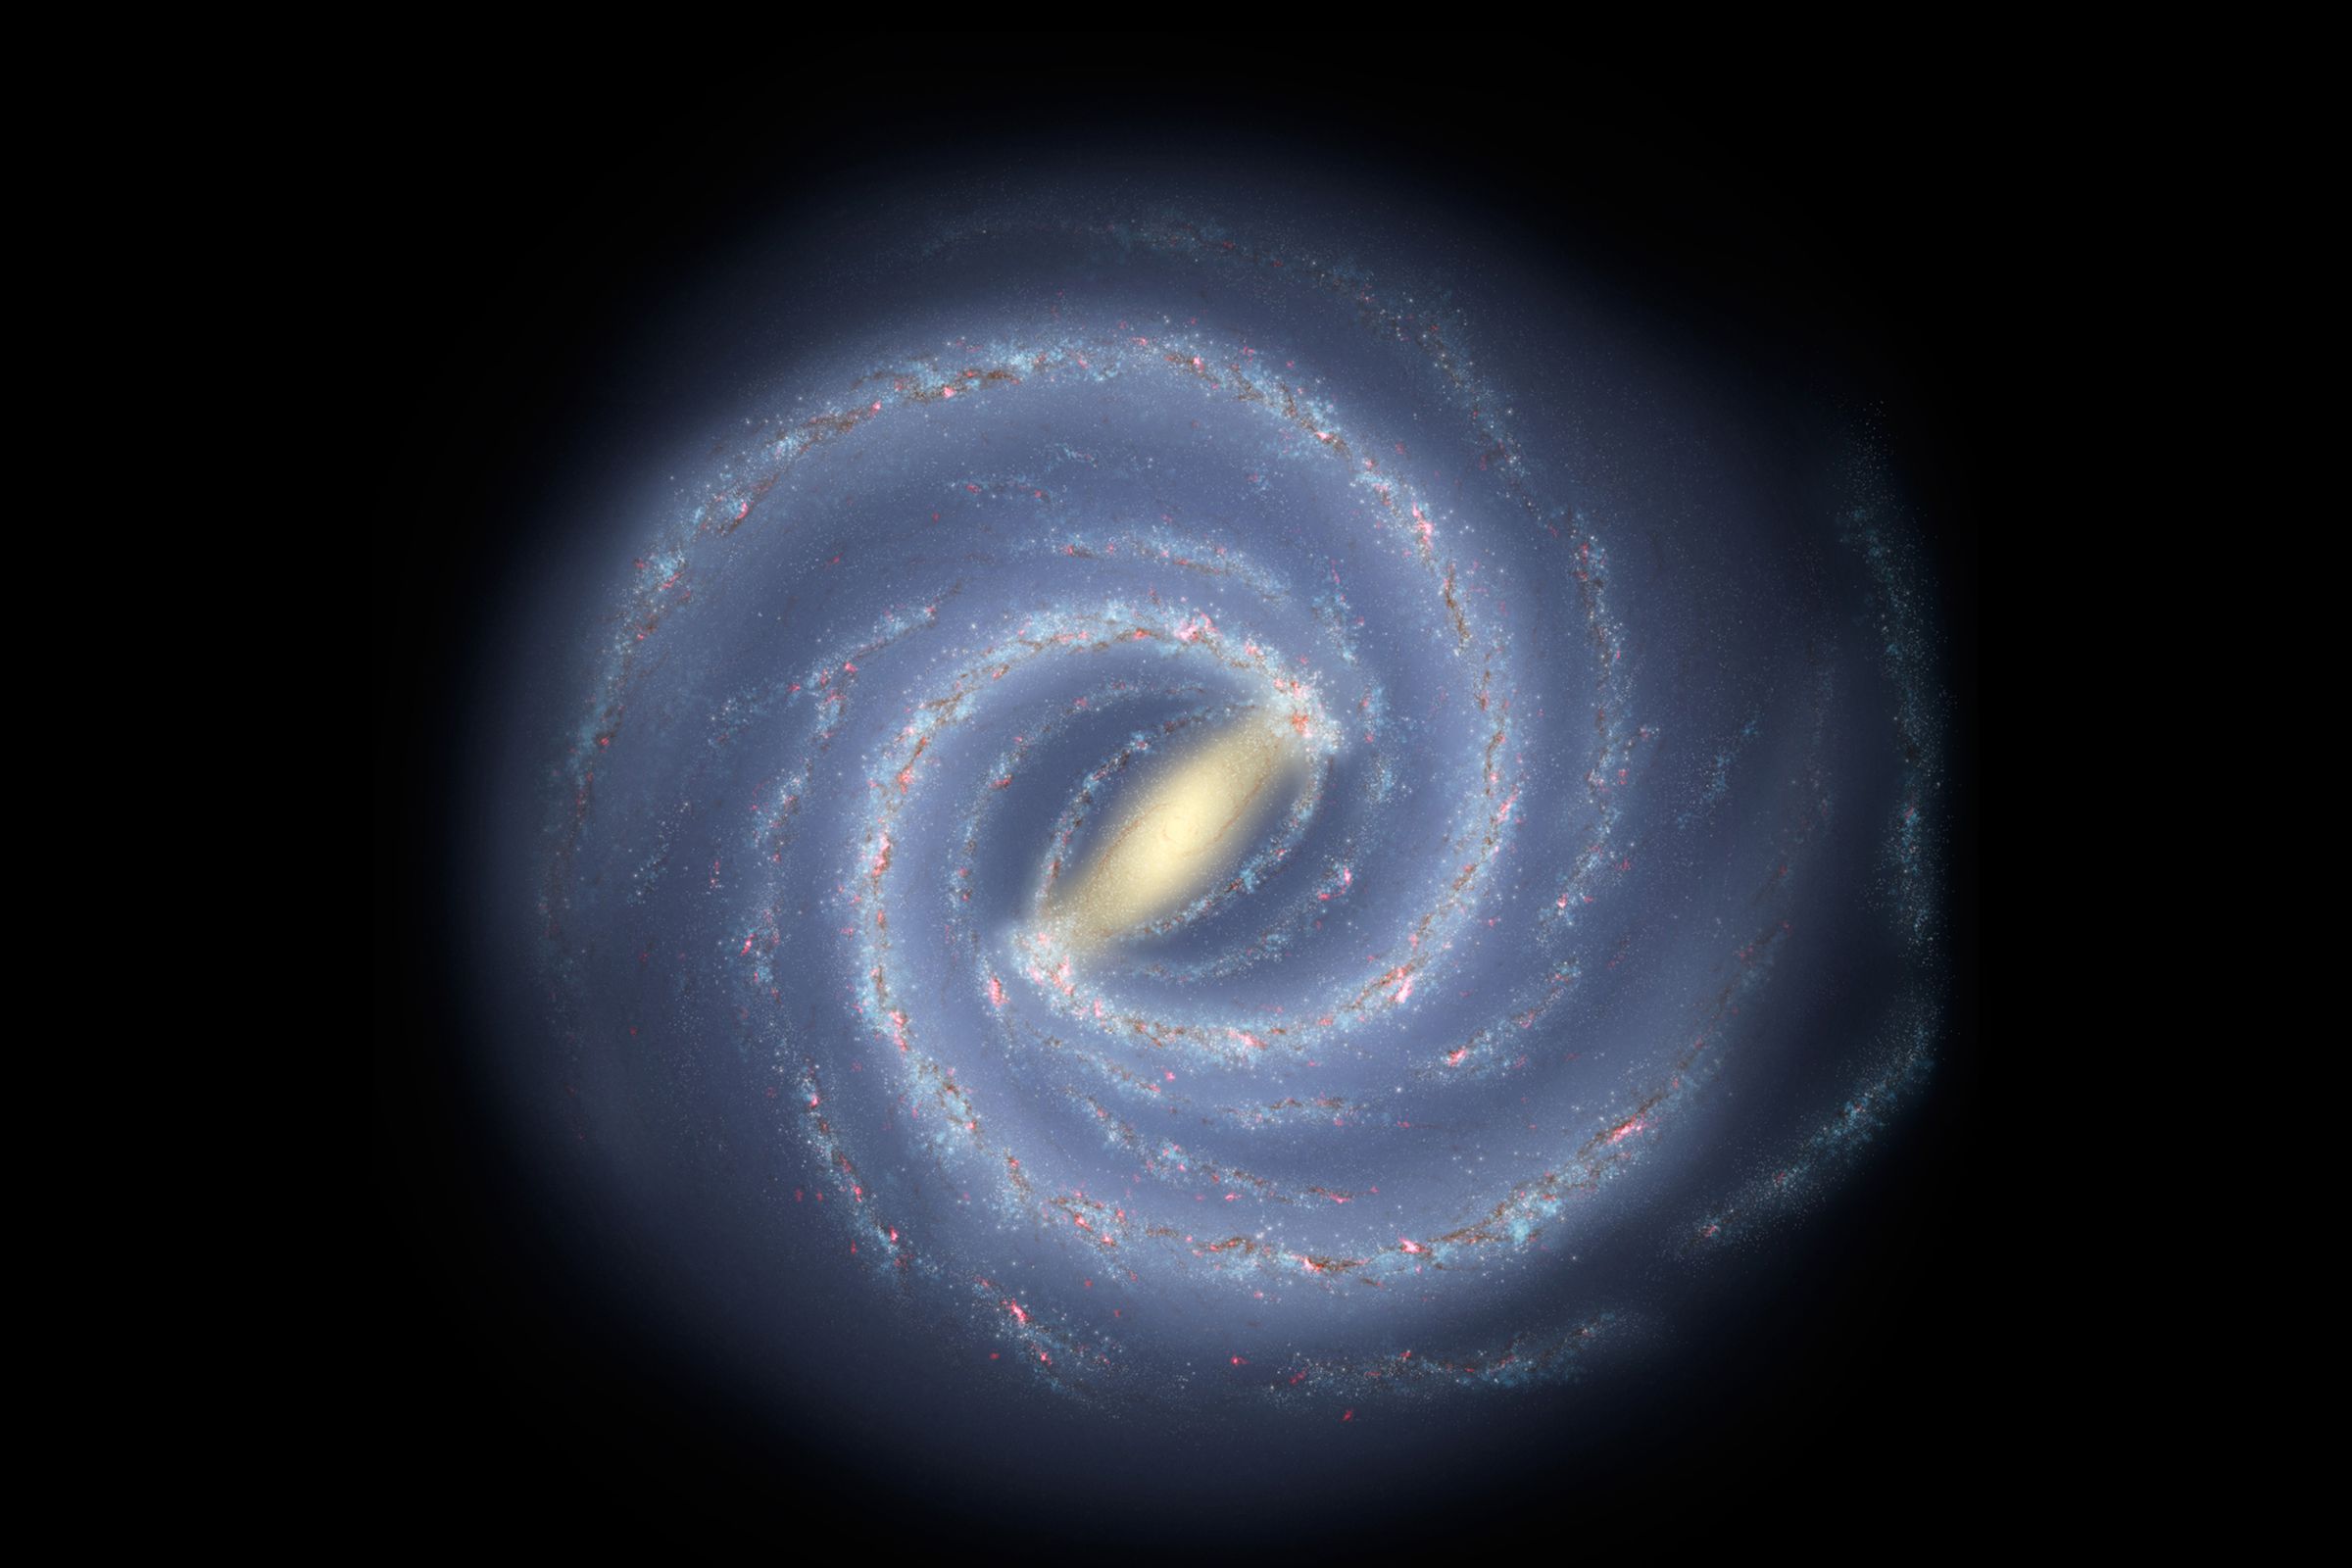 An artistic rendering of the Milky Way Galaxy.